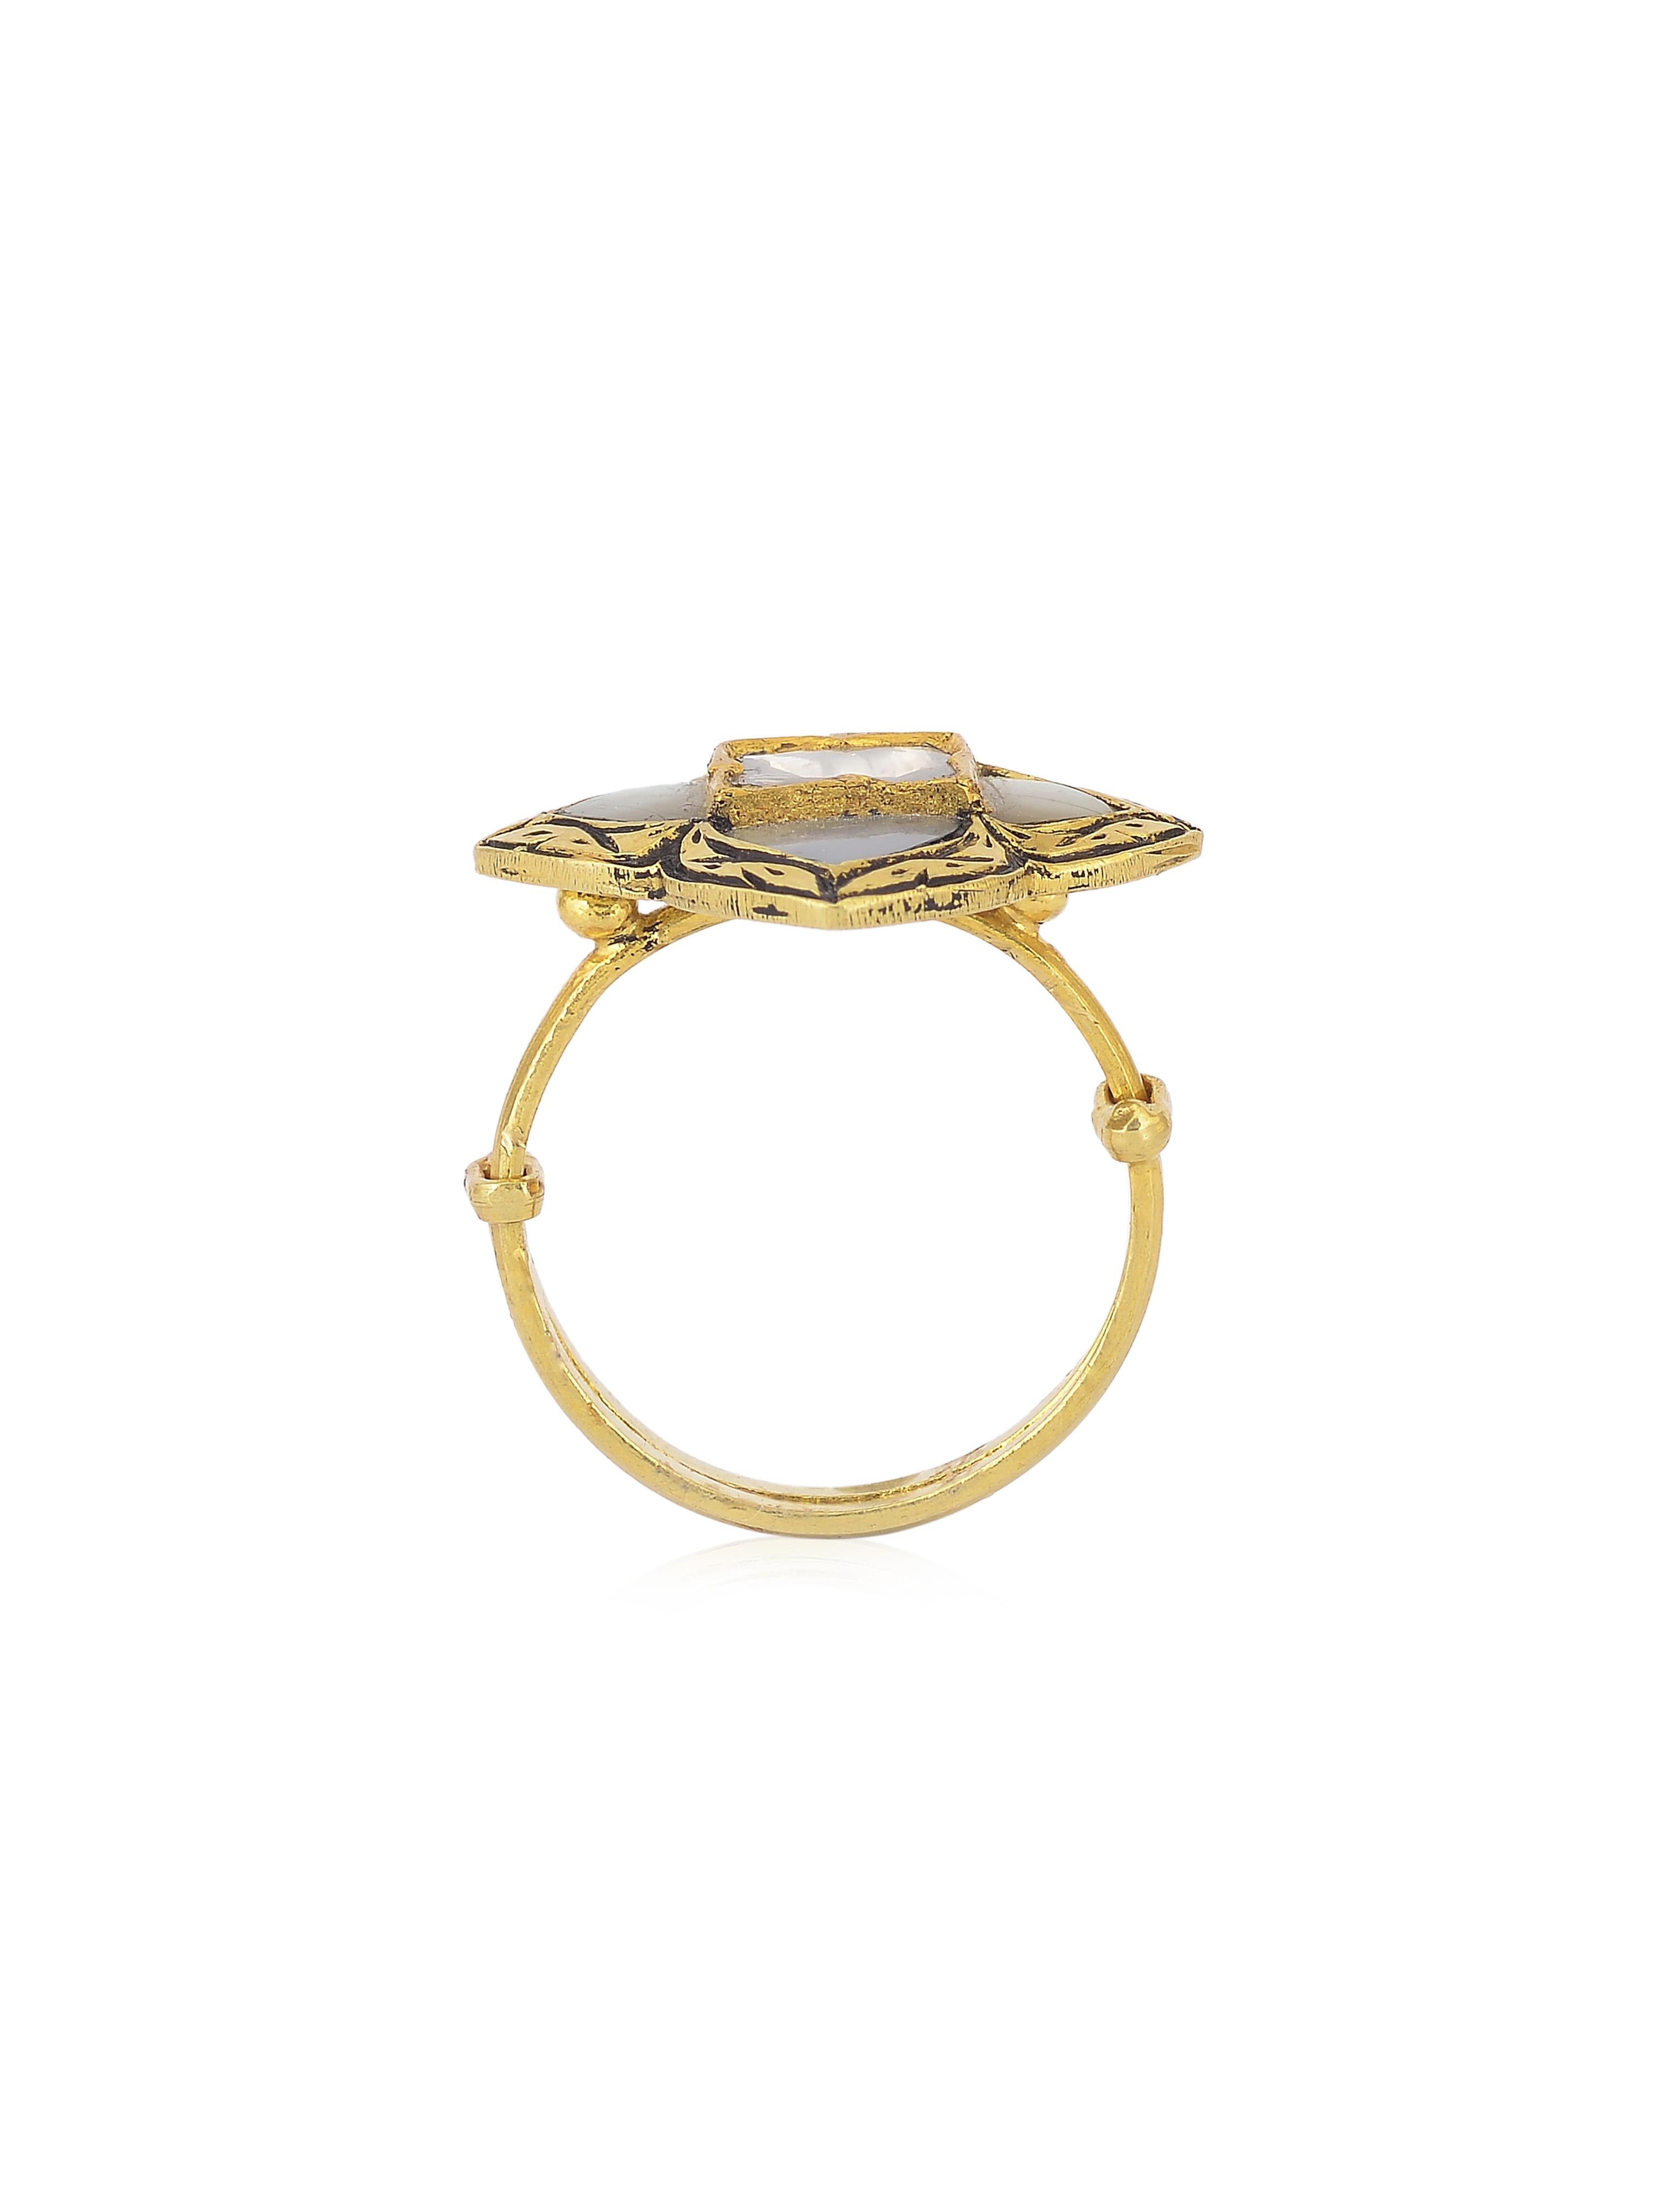 Women's or Men's Statement ring with Uncut diamond, Mother of pearl handcrafted in 18k Gold For Sale